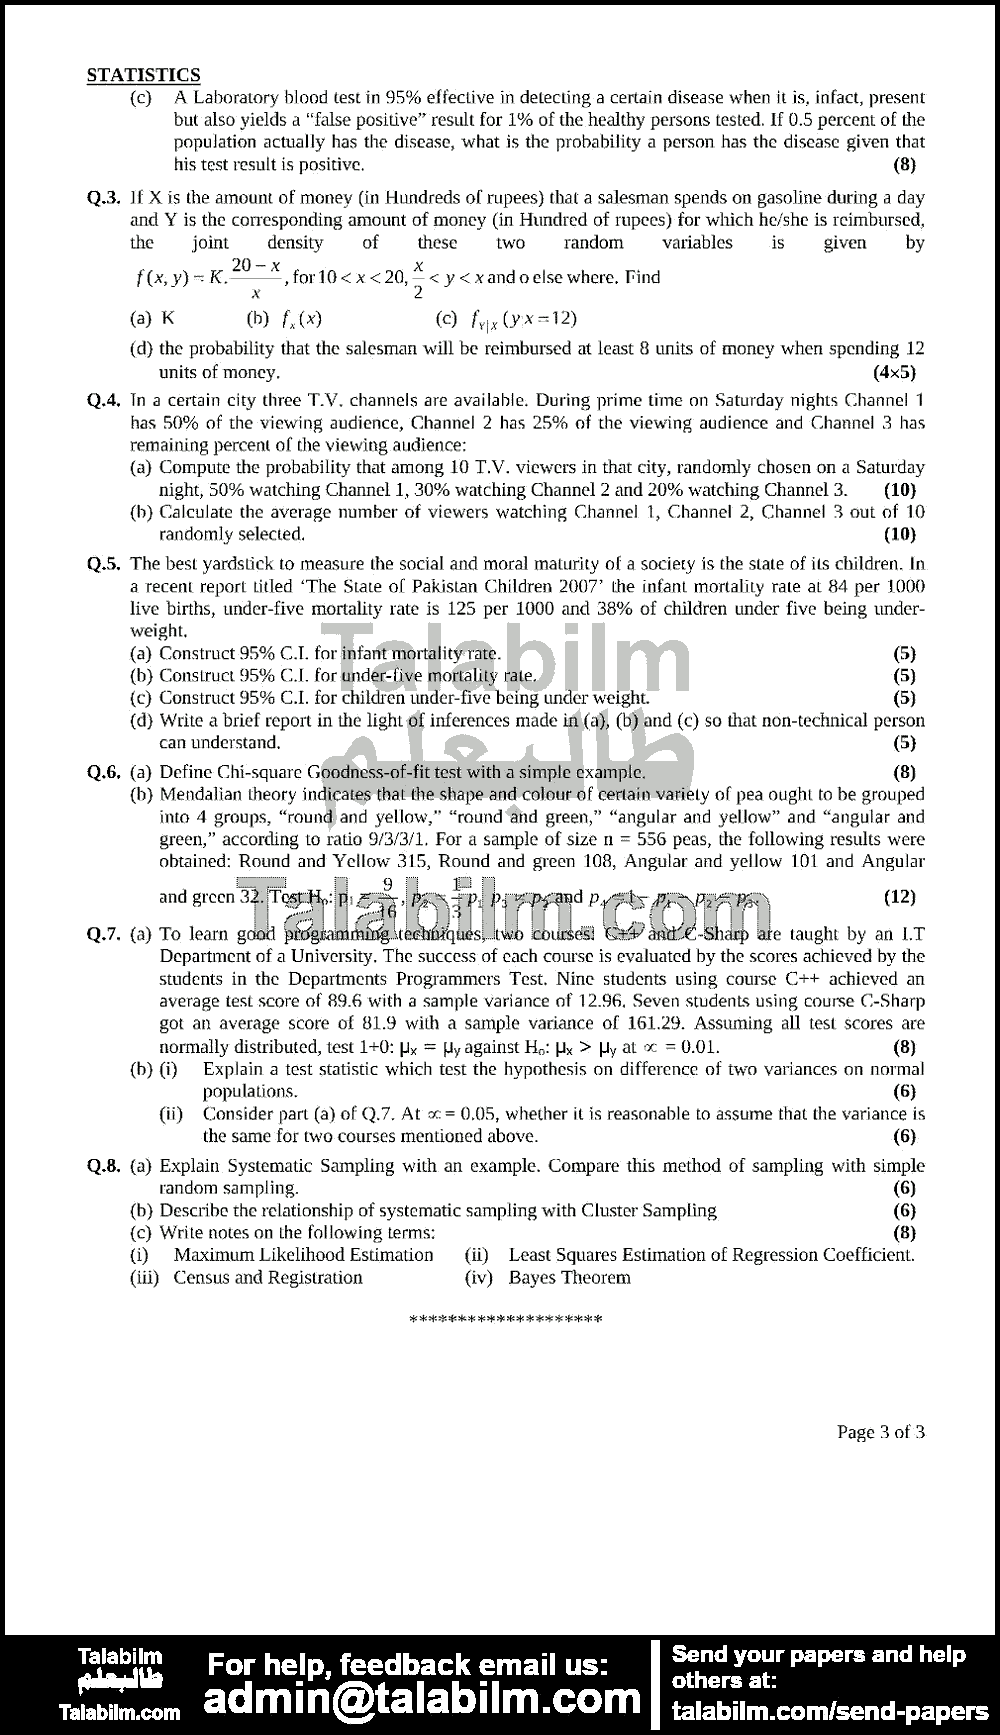 Statistics 0 past paper for 2009 Page No. 3